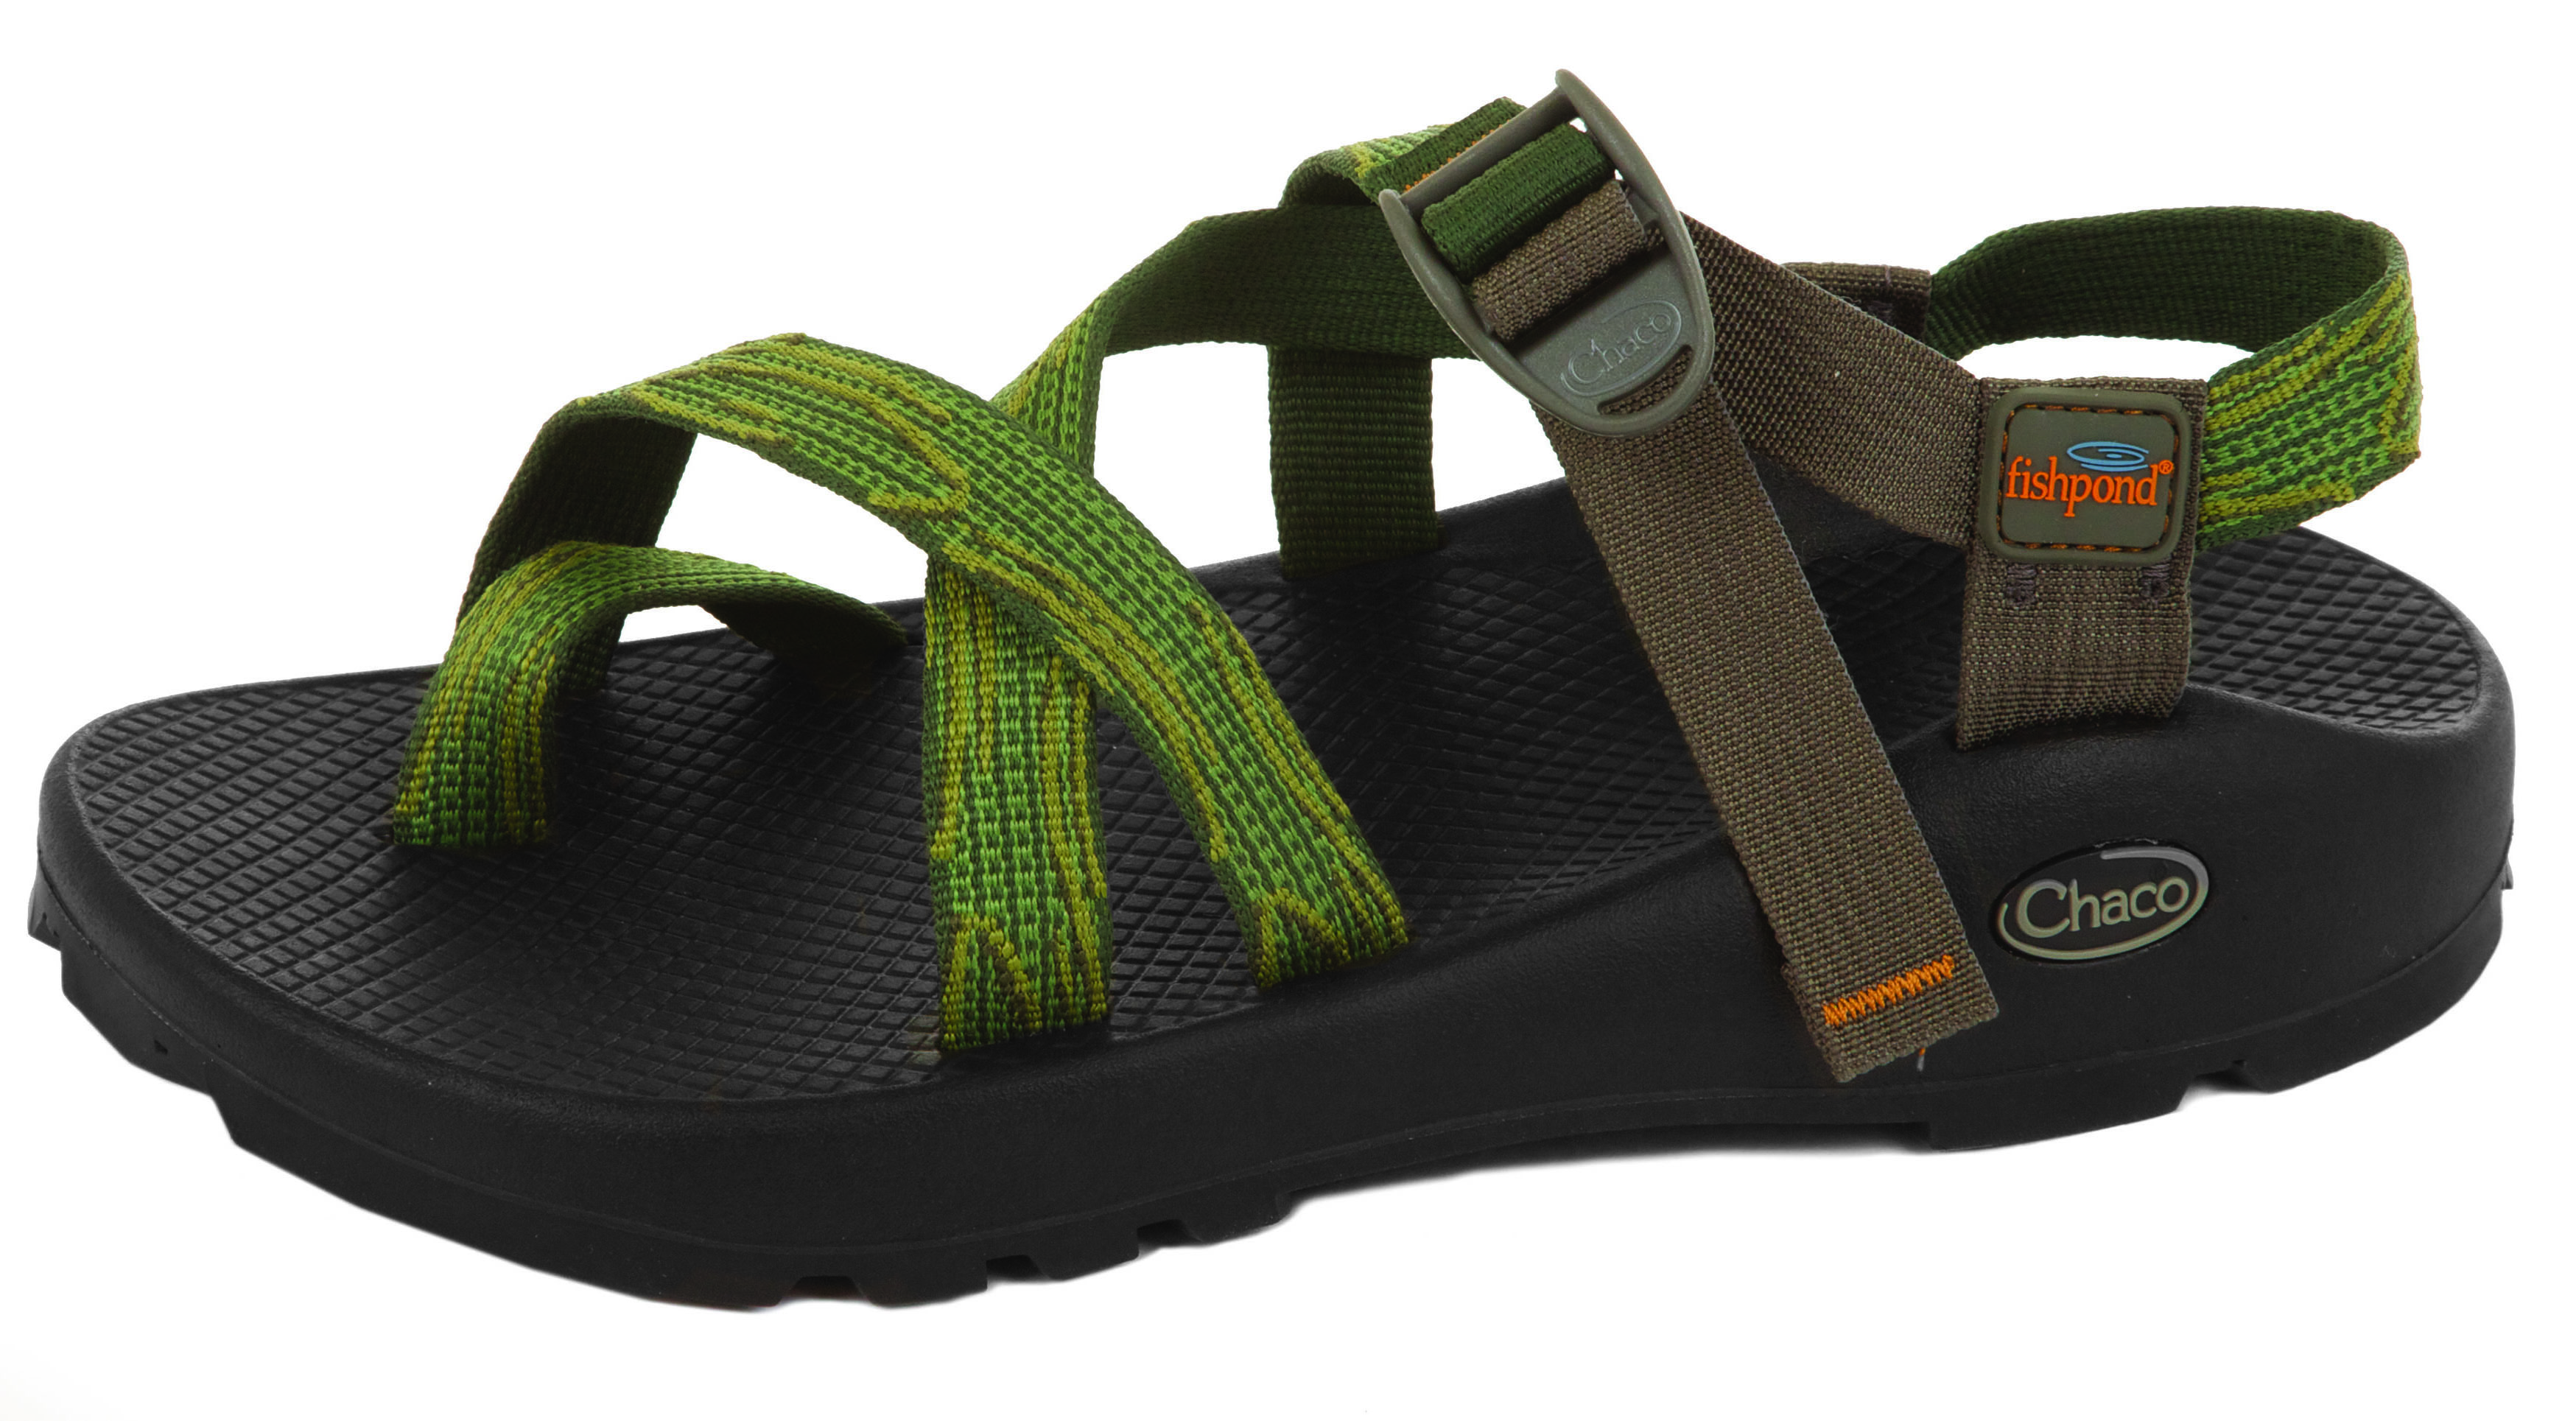 Fishing gear brand snags deal with Chaco - BusinessDen